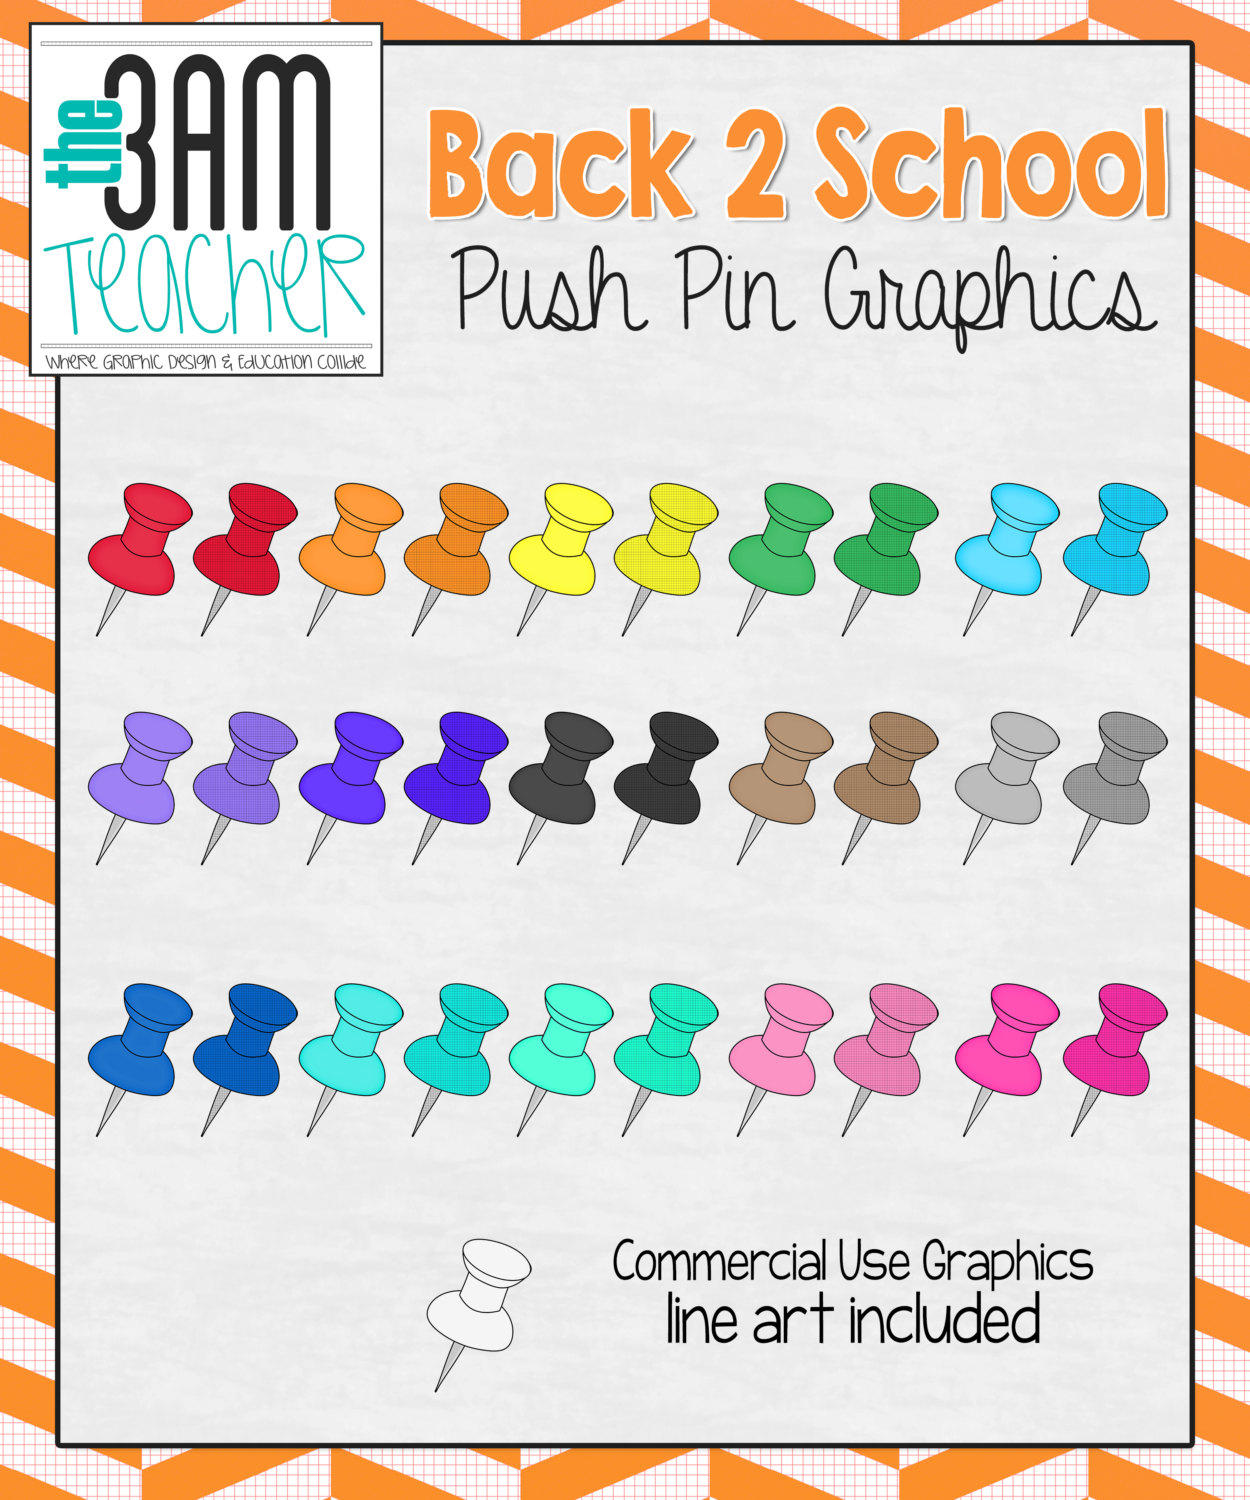 Digital Download Discoveries for SCHOOL SUPPLIES from EasyPeach.